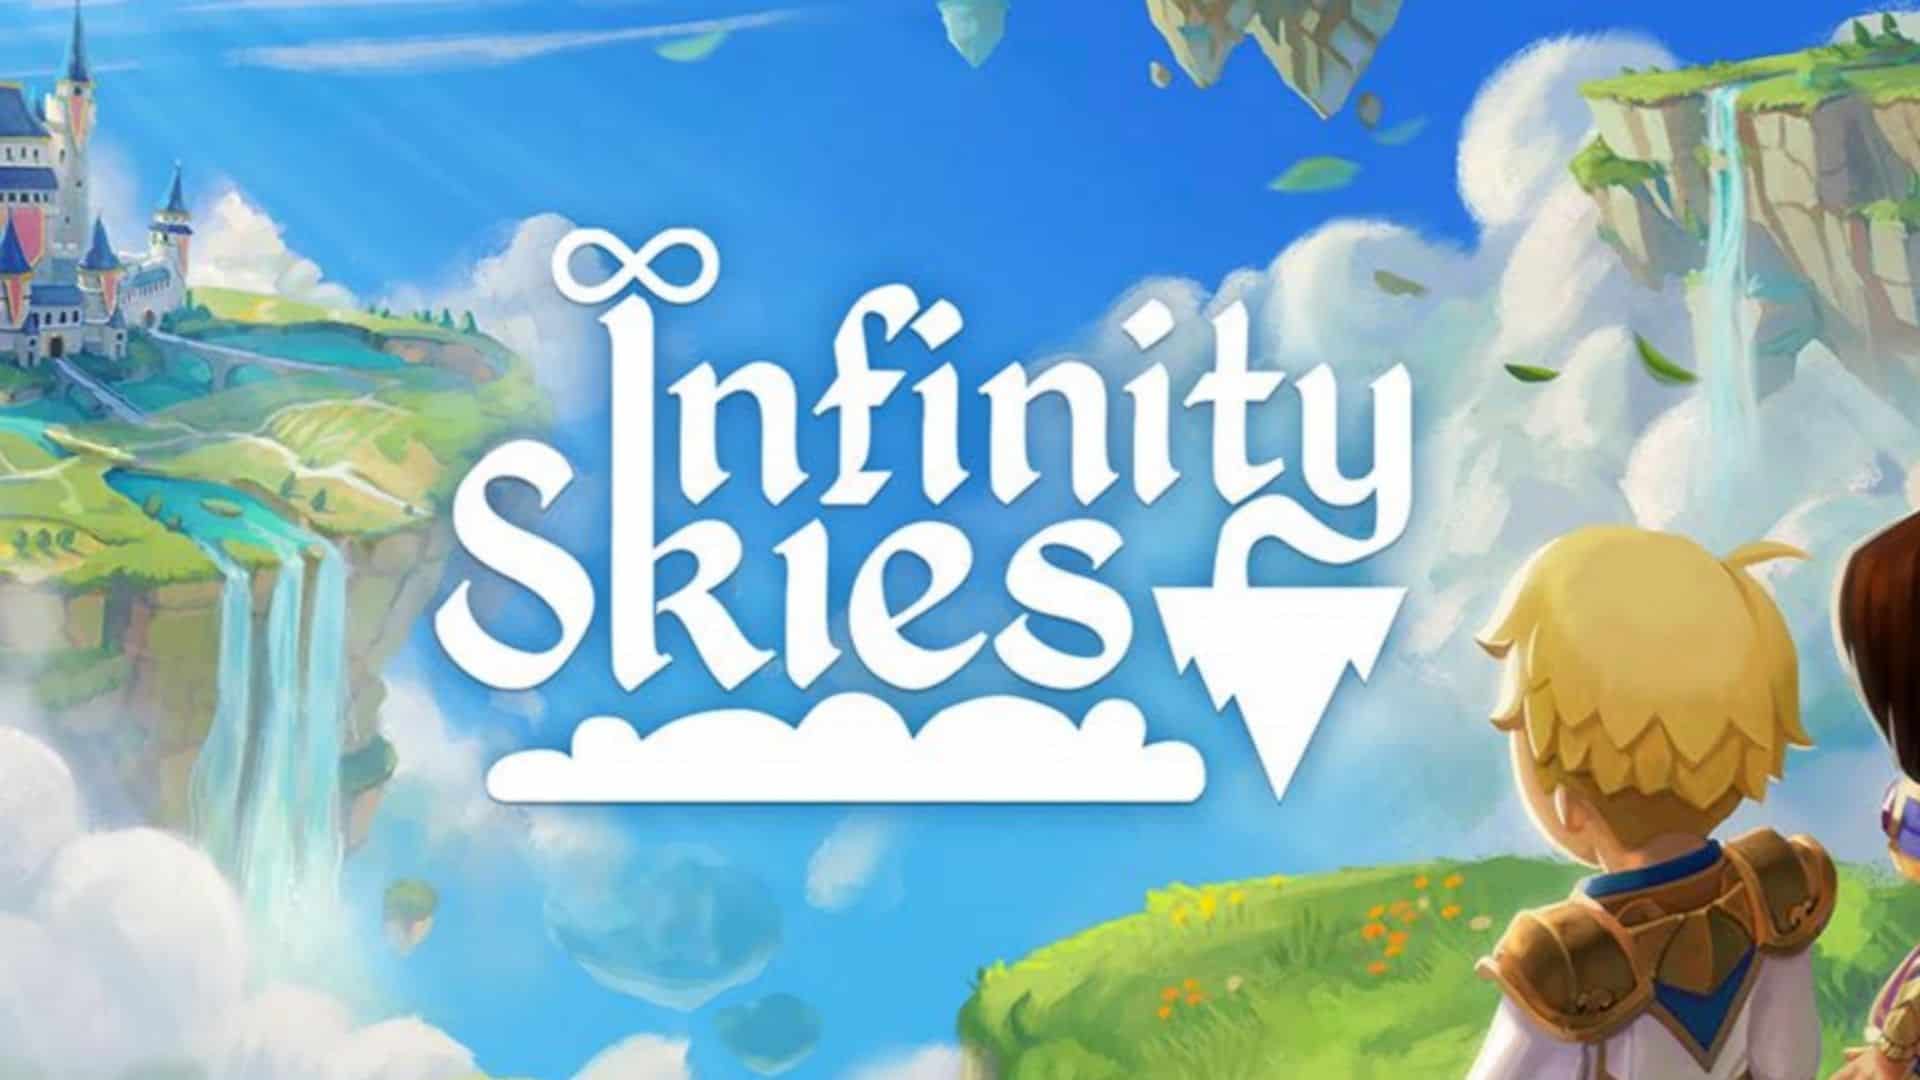 Infinity Skies Review – P2E Sandbox Game With NFTs & SkyBlock Token